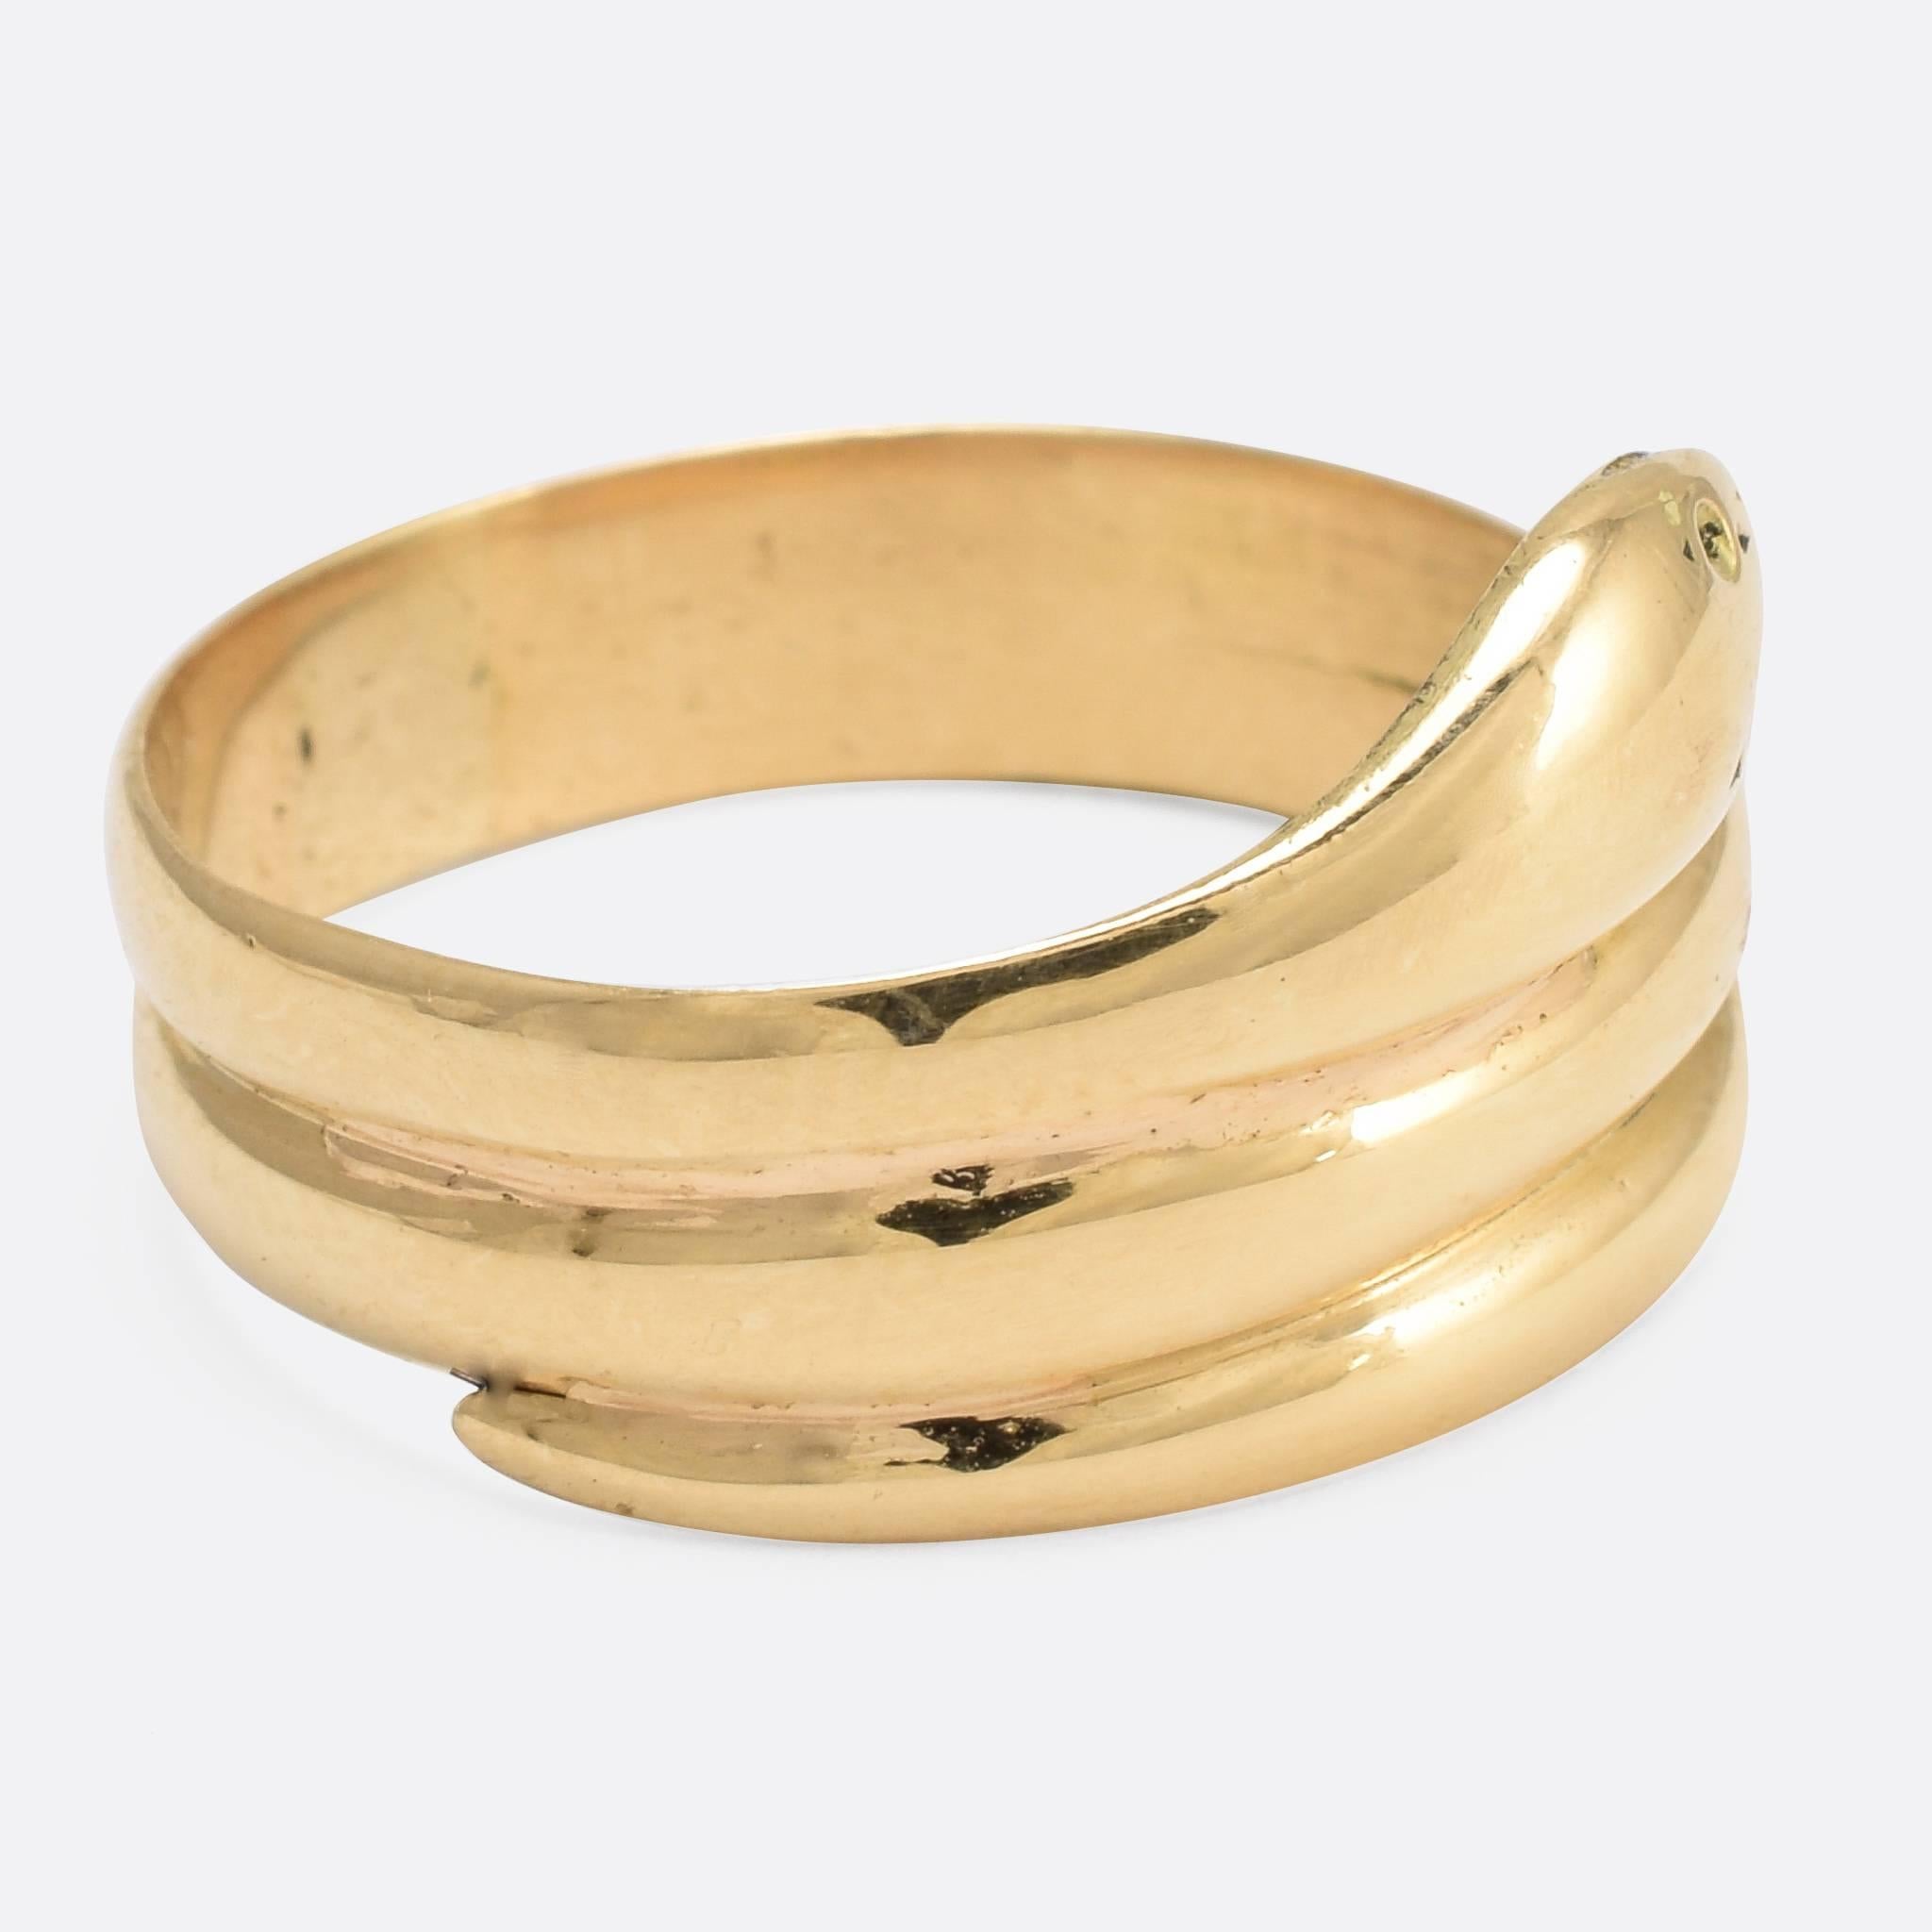 A cool 18k gold coiled snake ring, dating to the late 19th Century. The serpent coils around the finger twice, with a cute face and relatively slender profile for this style. A high quality piece of timeless design. Serpent jewellery has been